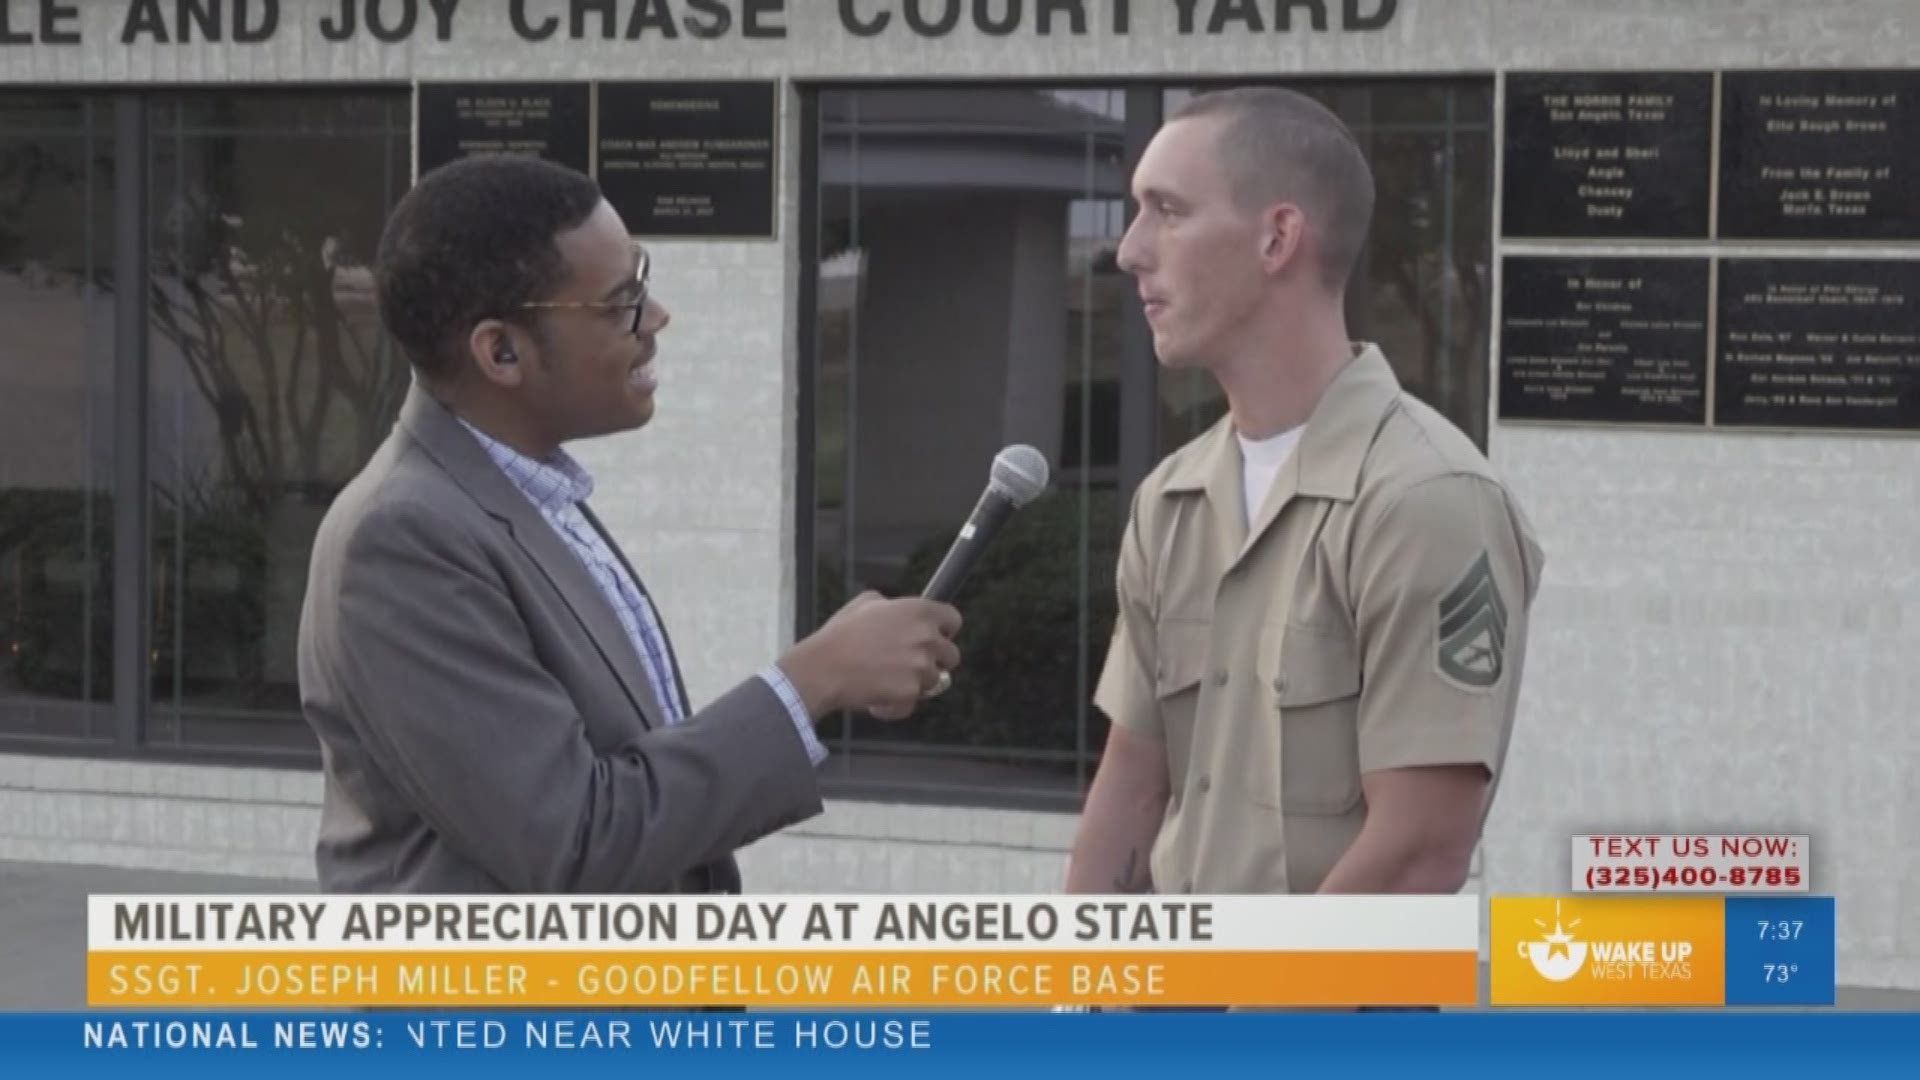 Our Malik Mingo spoke with SSgt. Joseph Miller about the importance of Military Appreciation Day at Angelo State University on September 14 outside the LeGrand Alumni and Visitors Center.